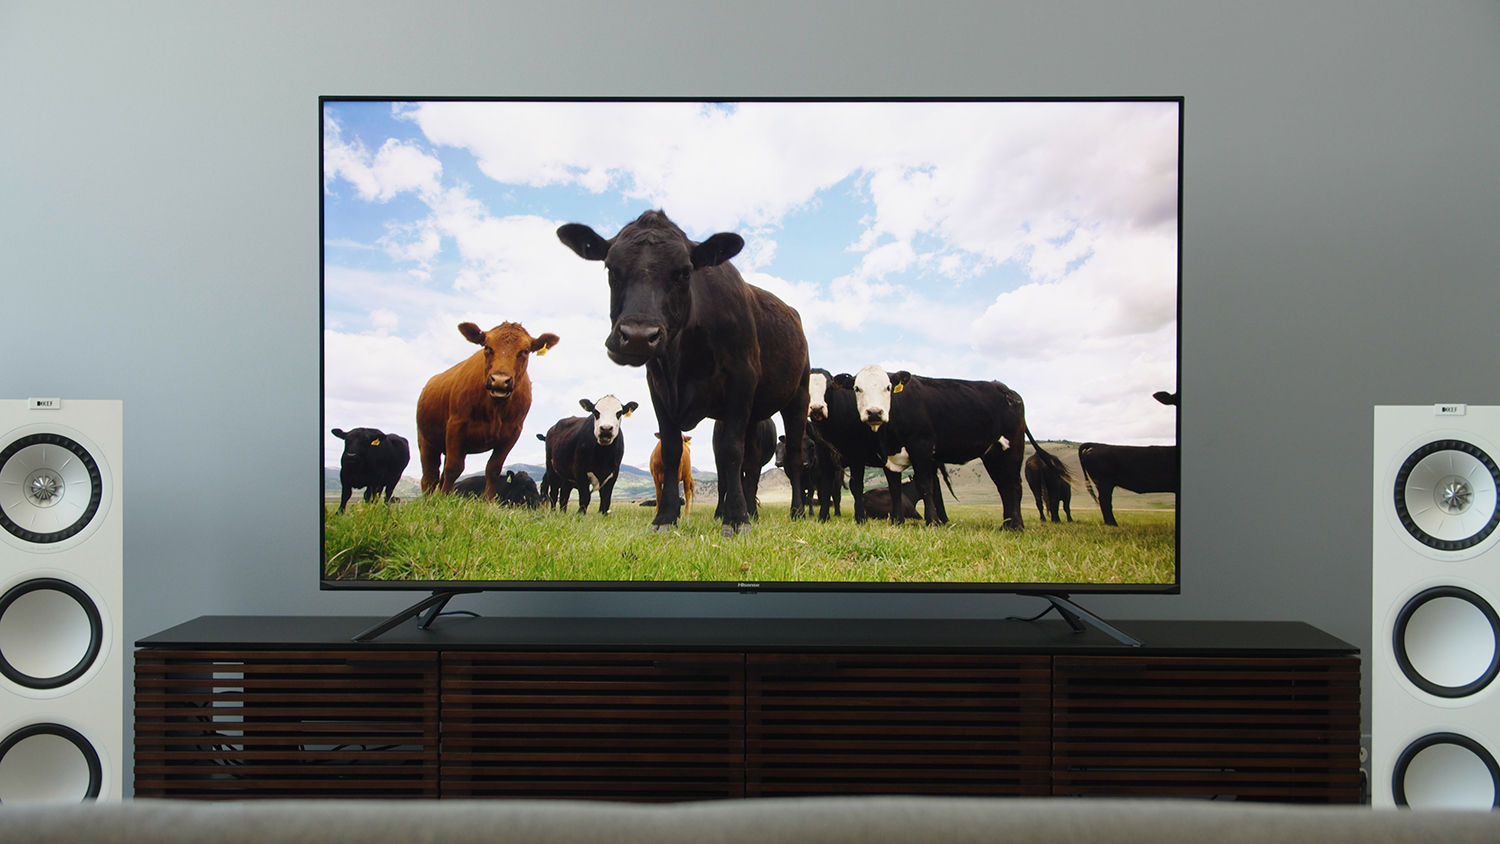  The best 4K TVs for under 500: a premium picture on a budget